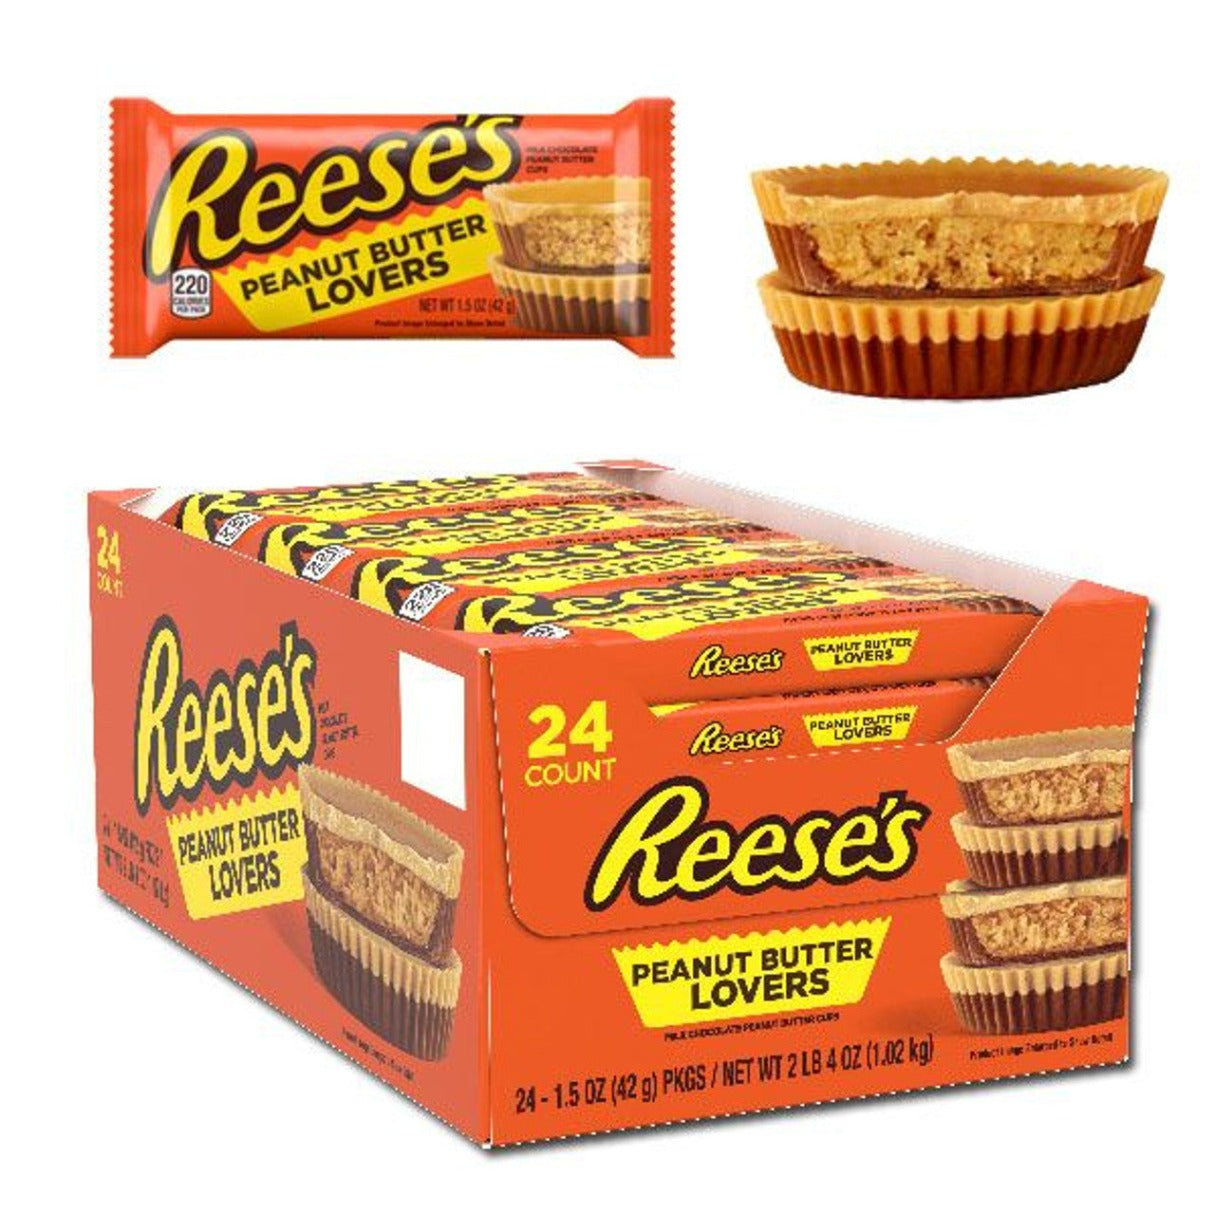 Reese's Peanut Butter Lovers Cup - 24ct